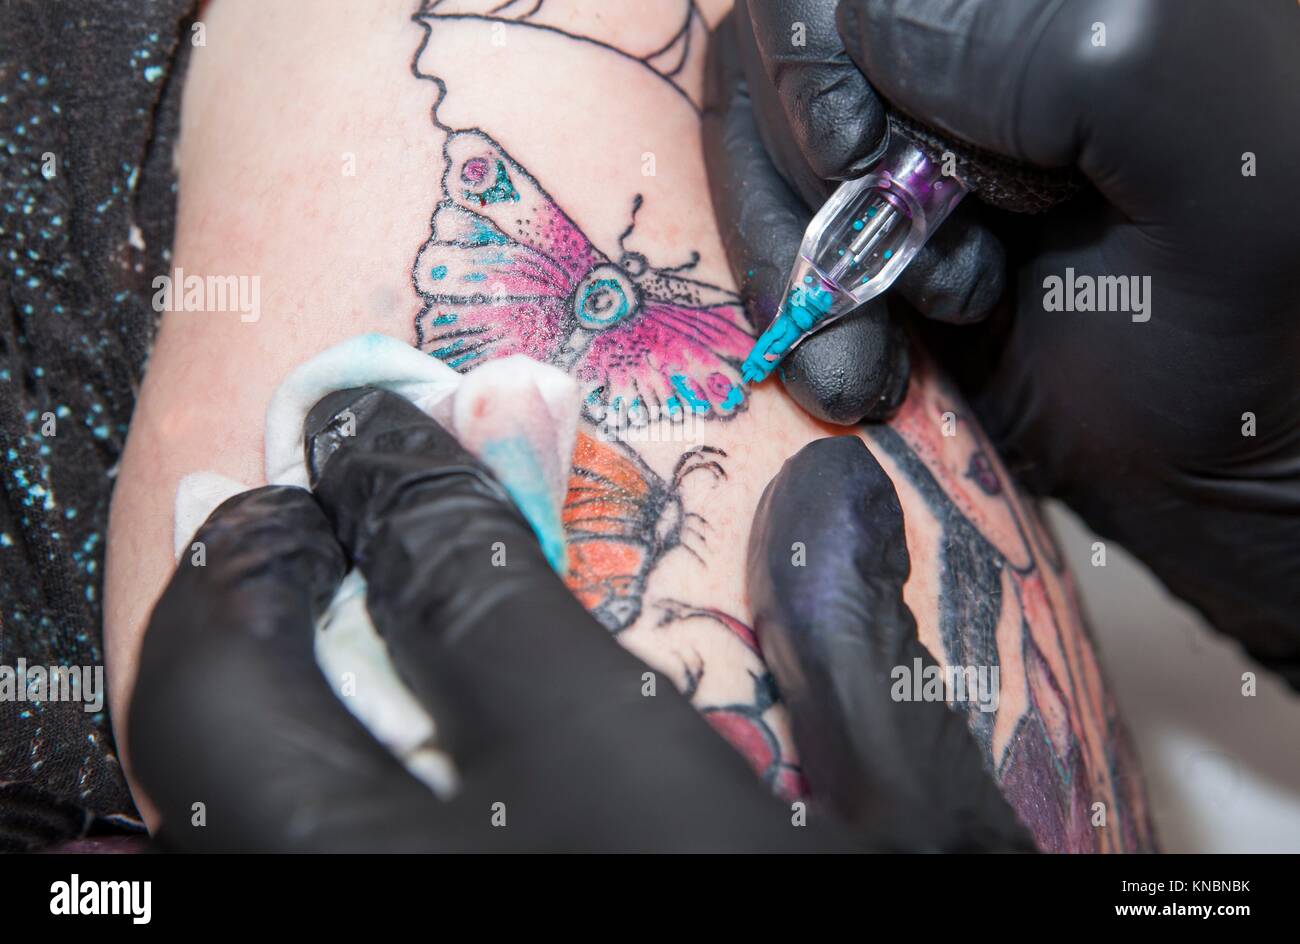 Tattoo artist applies tattoo to arm. She is filling with light blue color the tattoo. Stock Photo